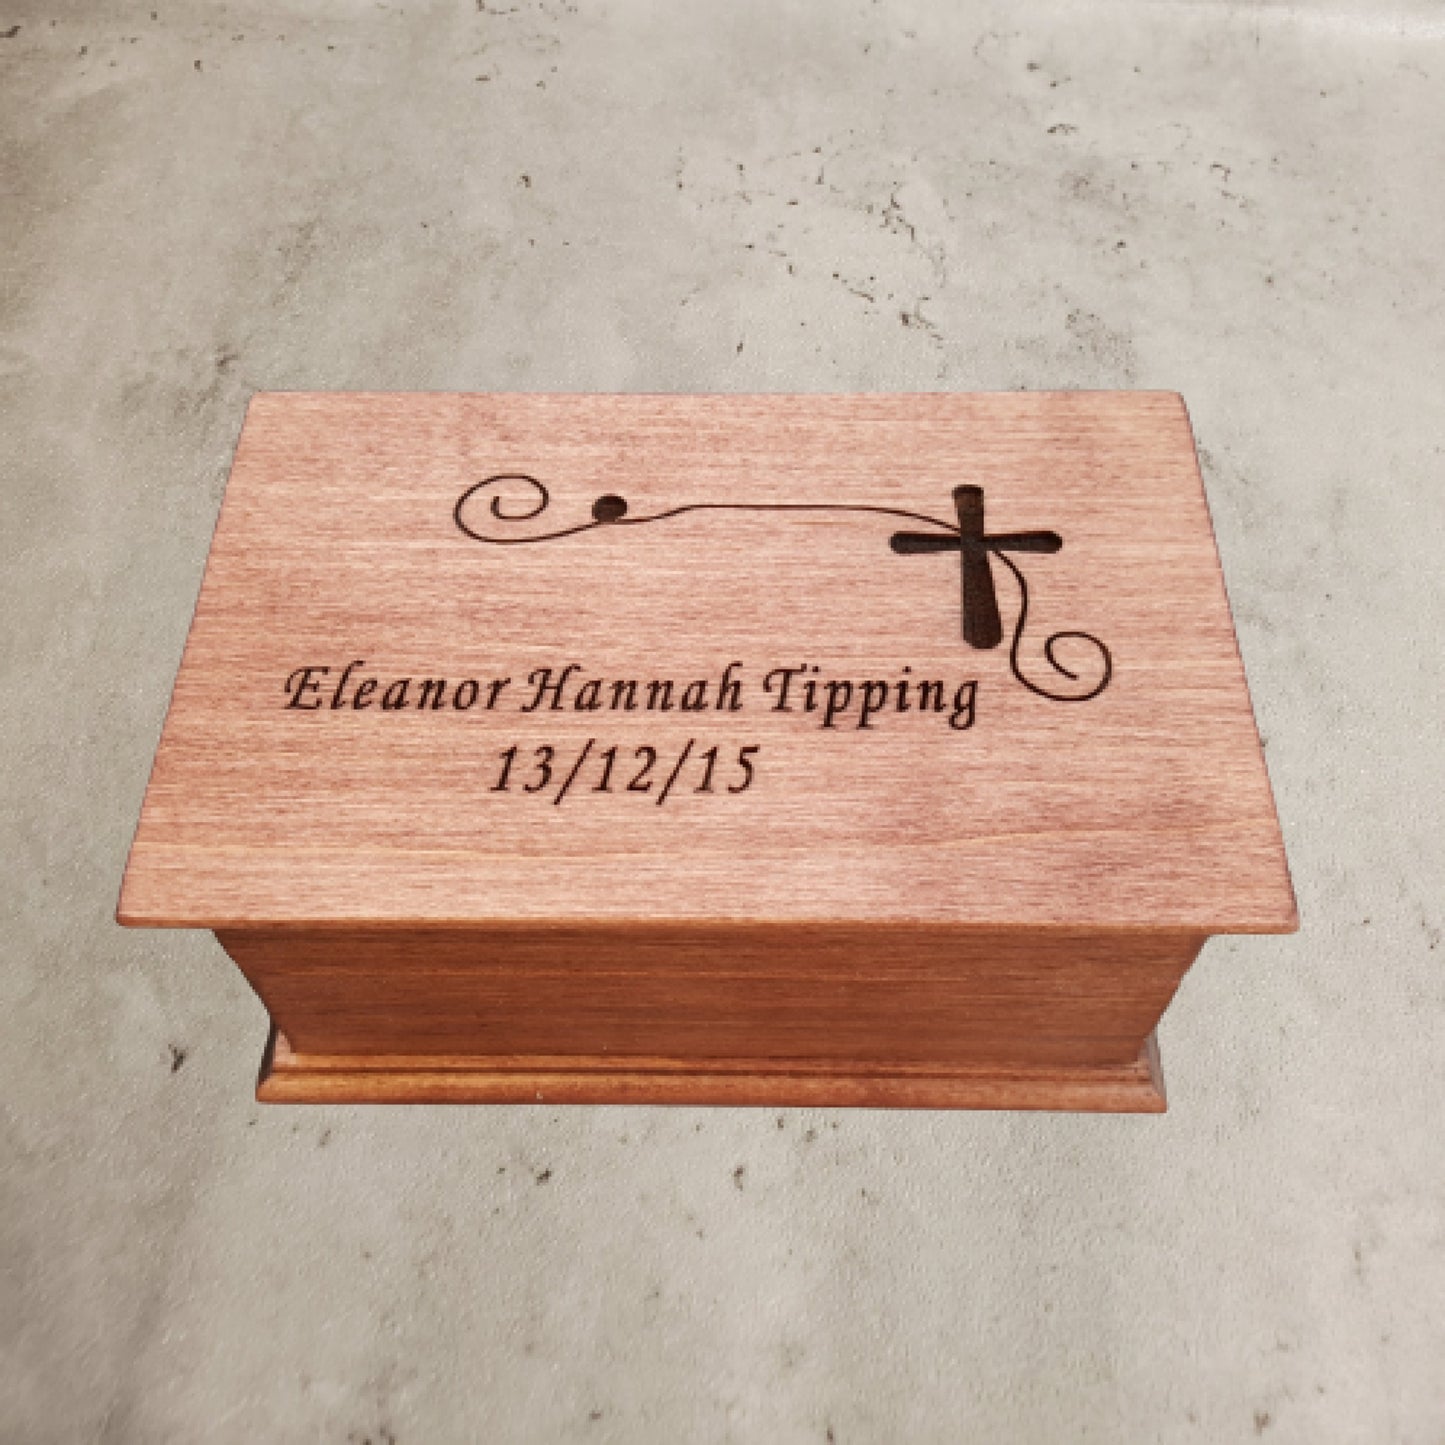 Baptism box with name and cross on top with built in music player